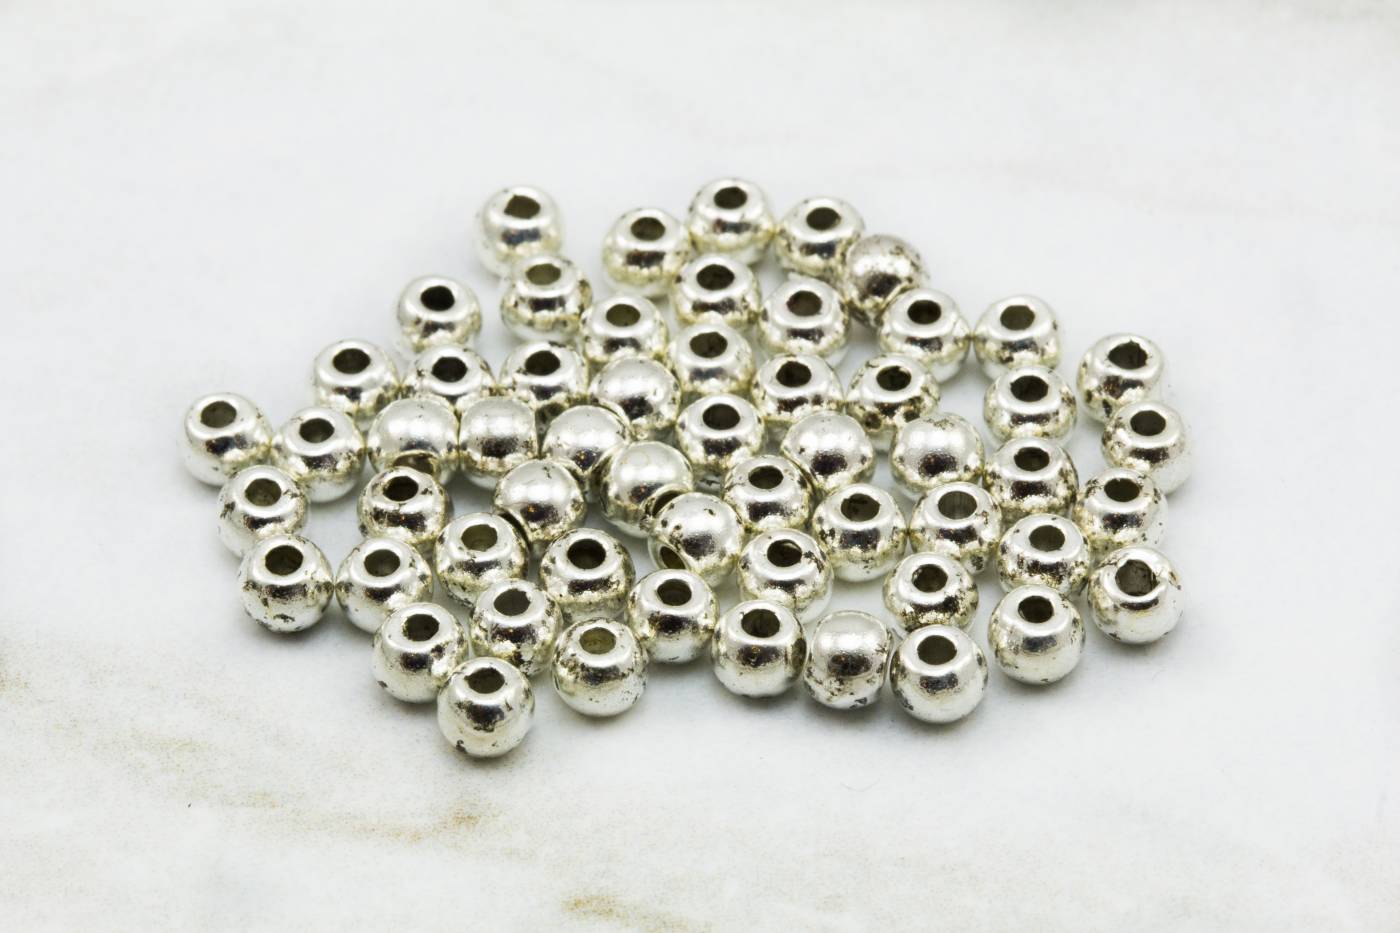 4mm-metal-ball-spacer-bead-charm-finding